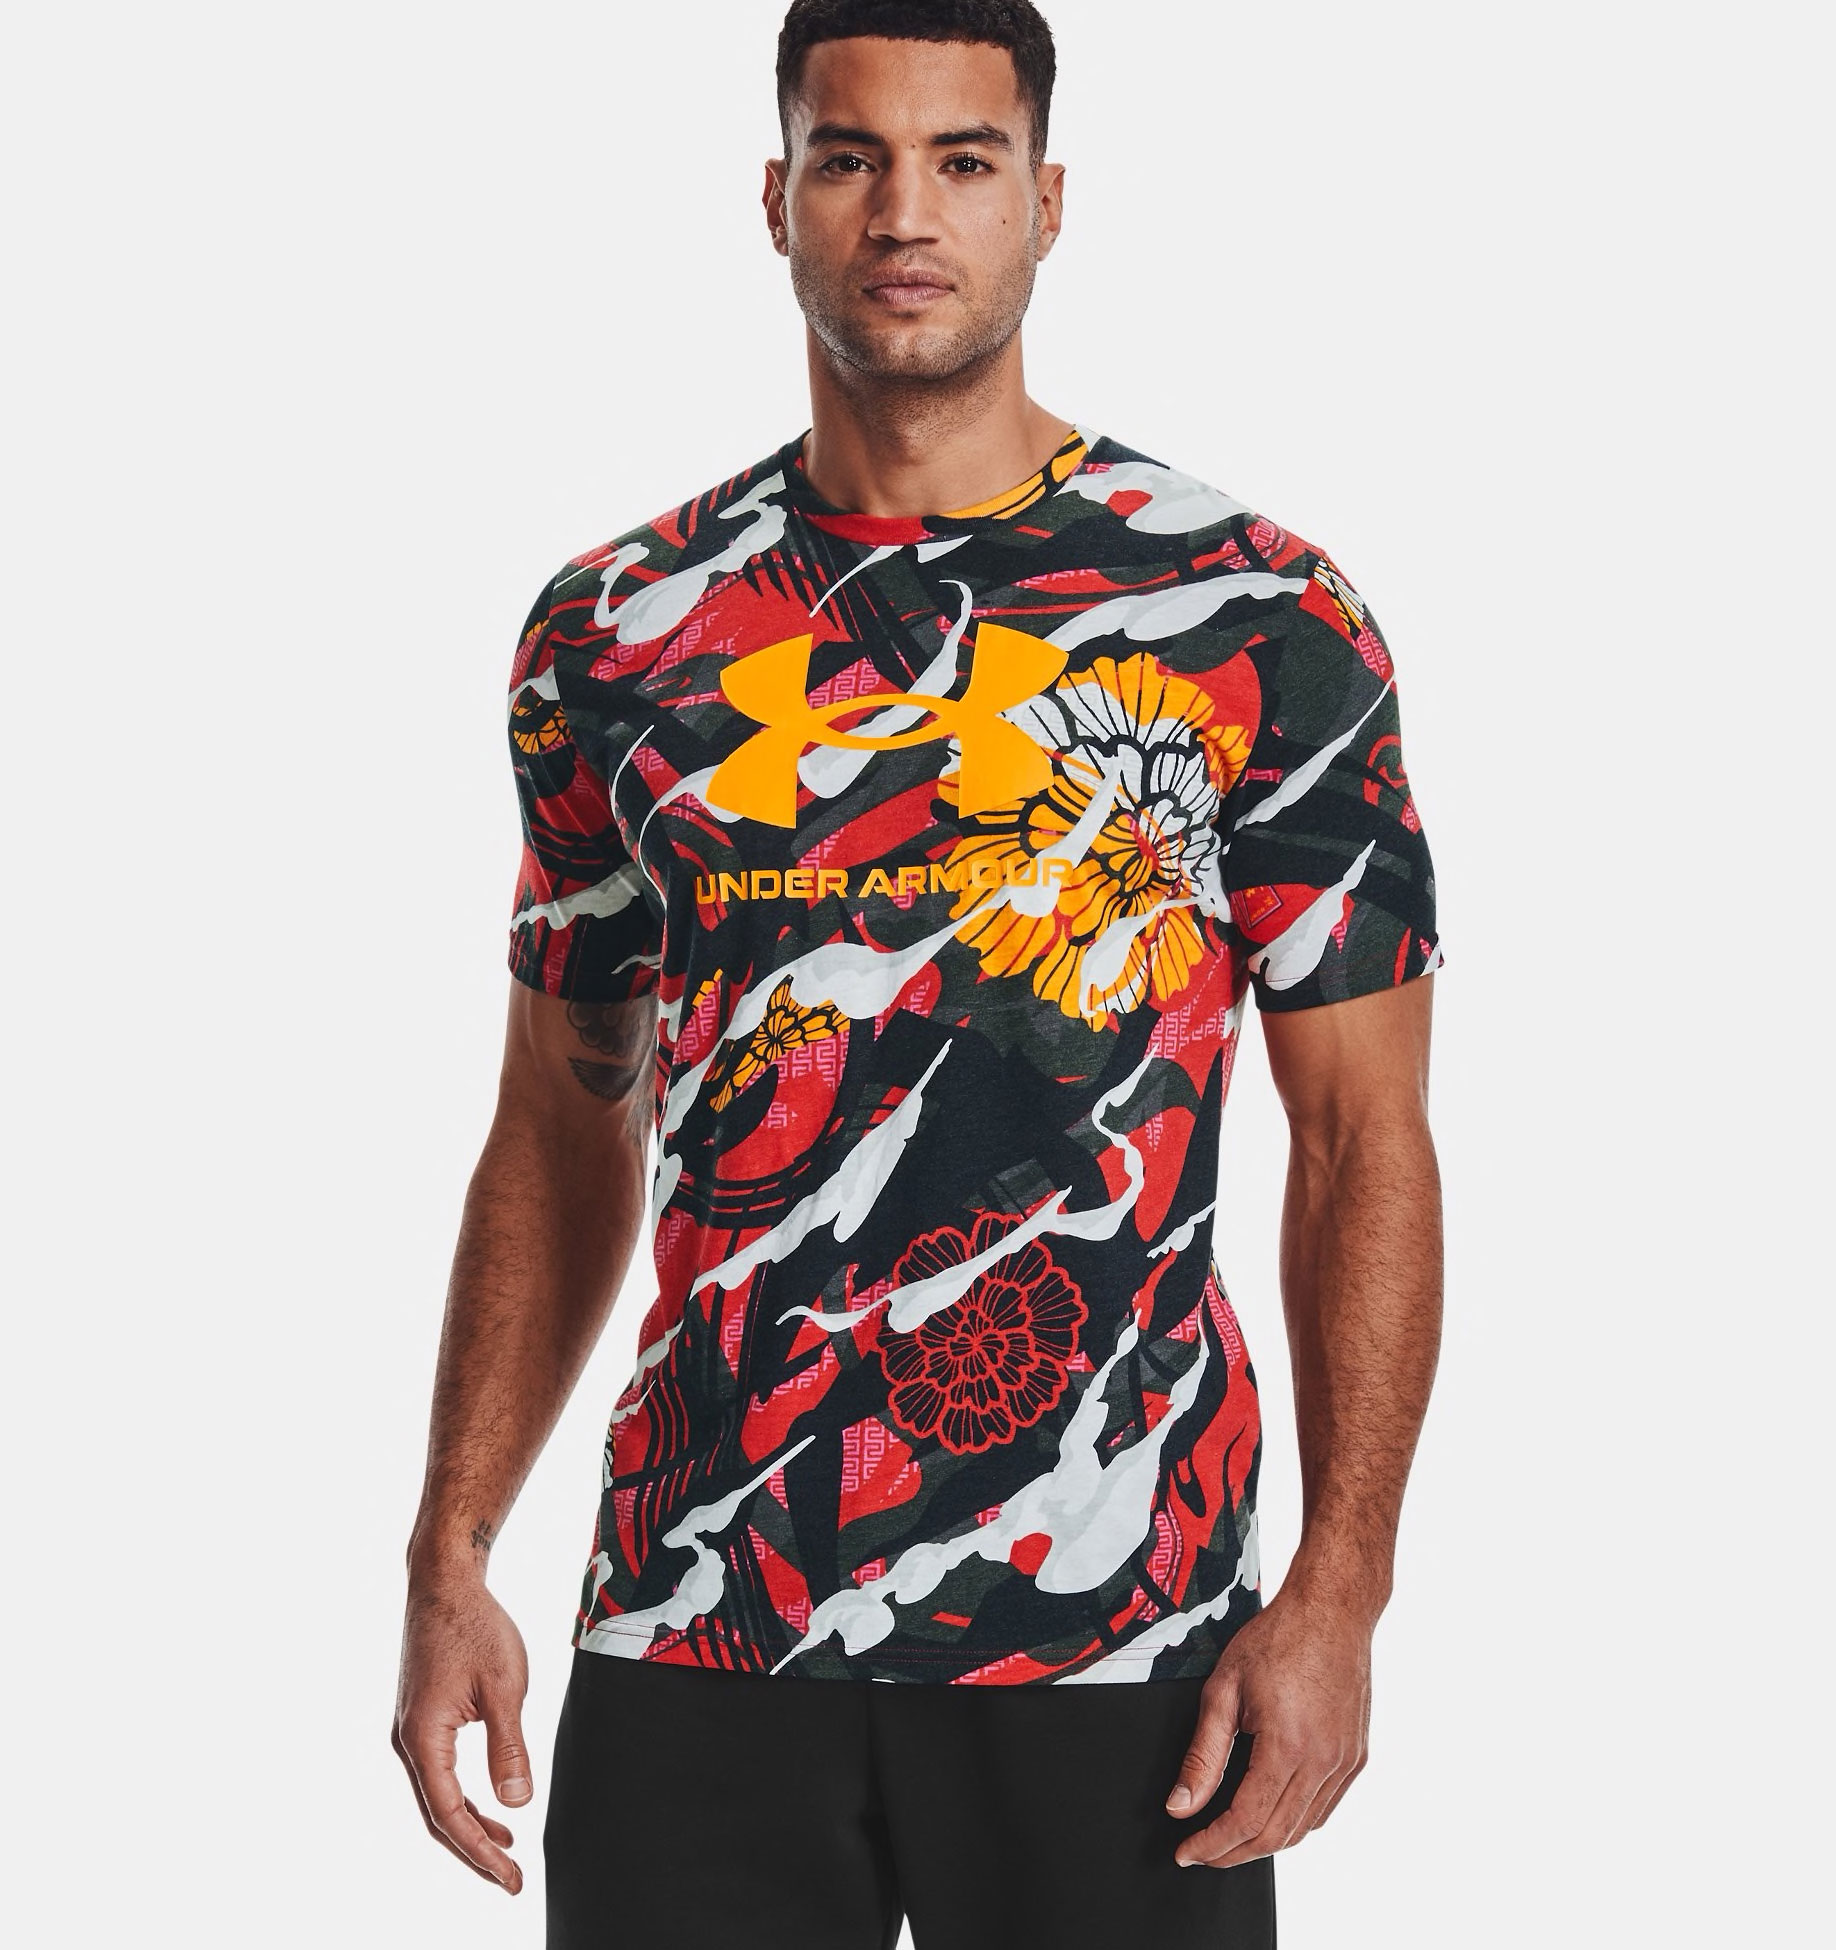 under-armour-chinese-new-year-curry-8-cny-shirt